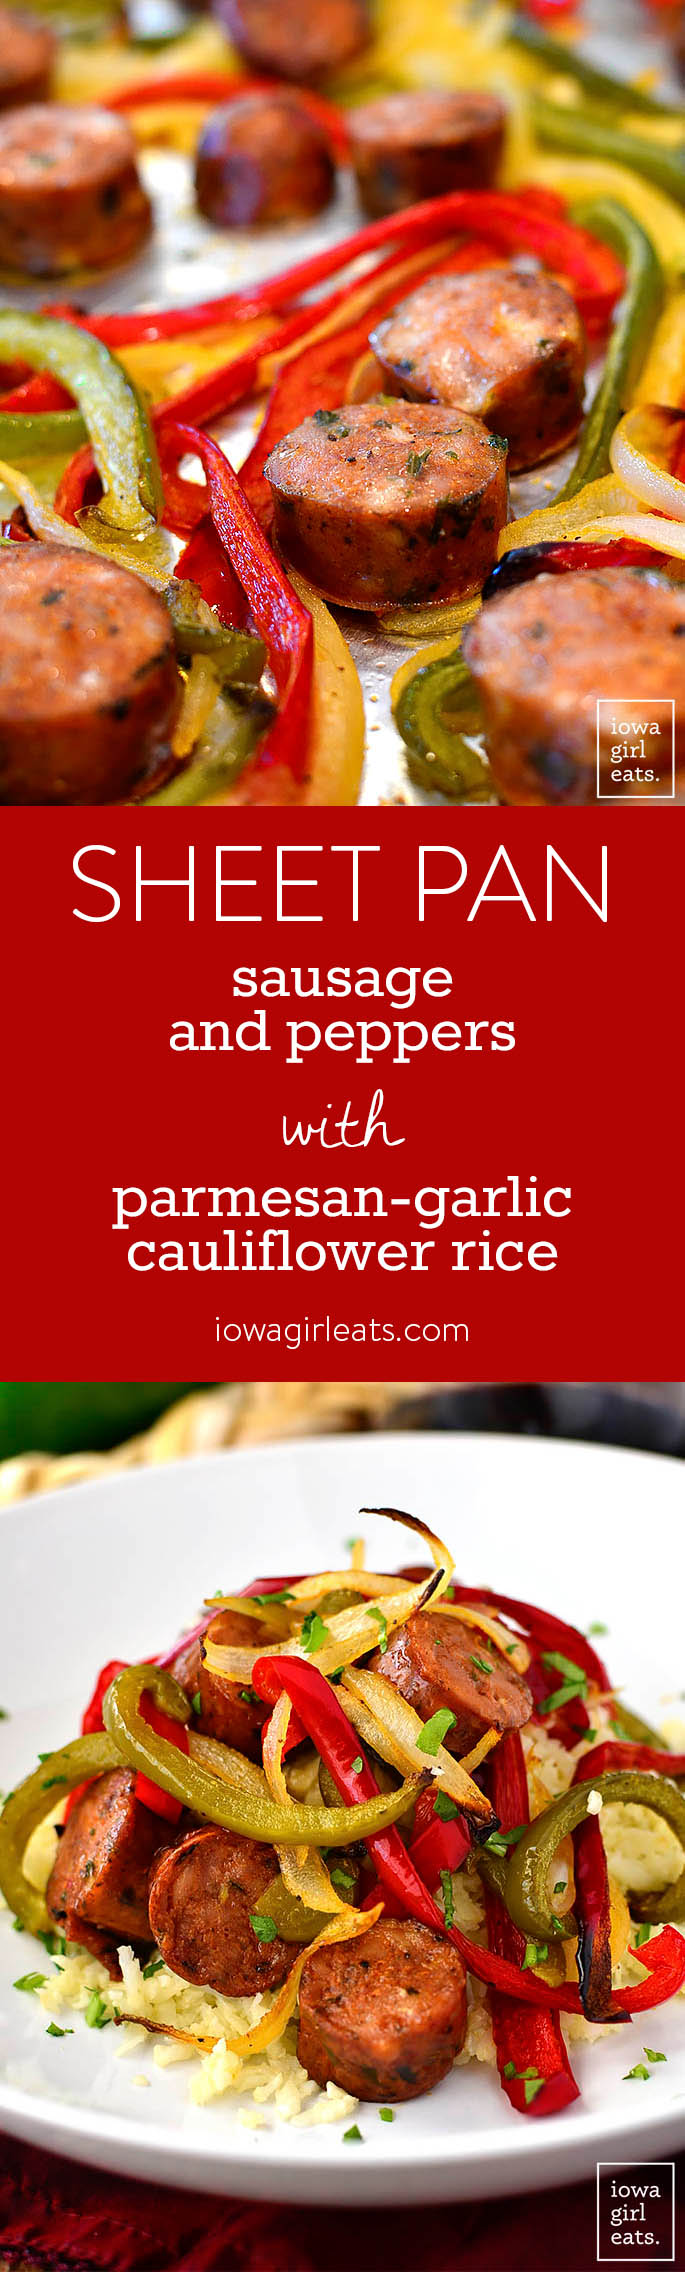 Sheet Pan Sausage and Peppers with Parmesan-Garlic Cauliflower Rice is simple and packed with healthy vegetables. This gluten-free dinner recipe is absolutely delicious! | iowagirleats.com